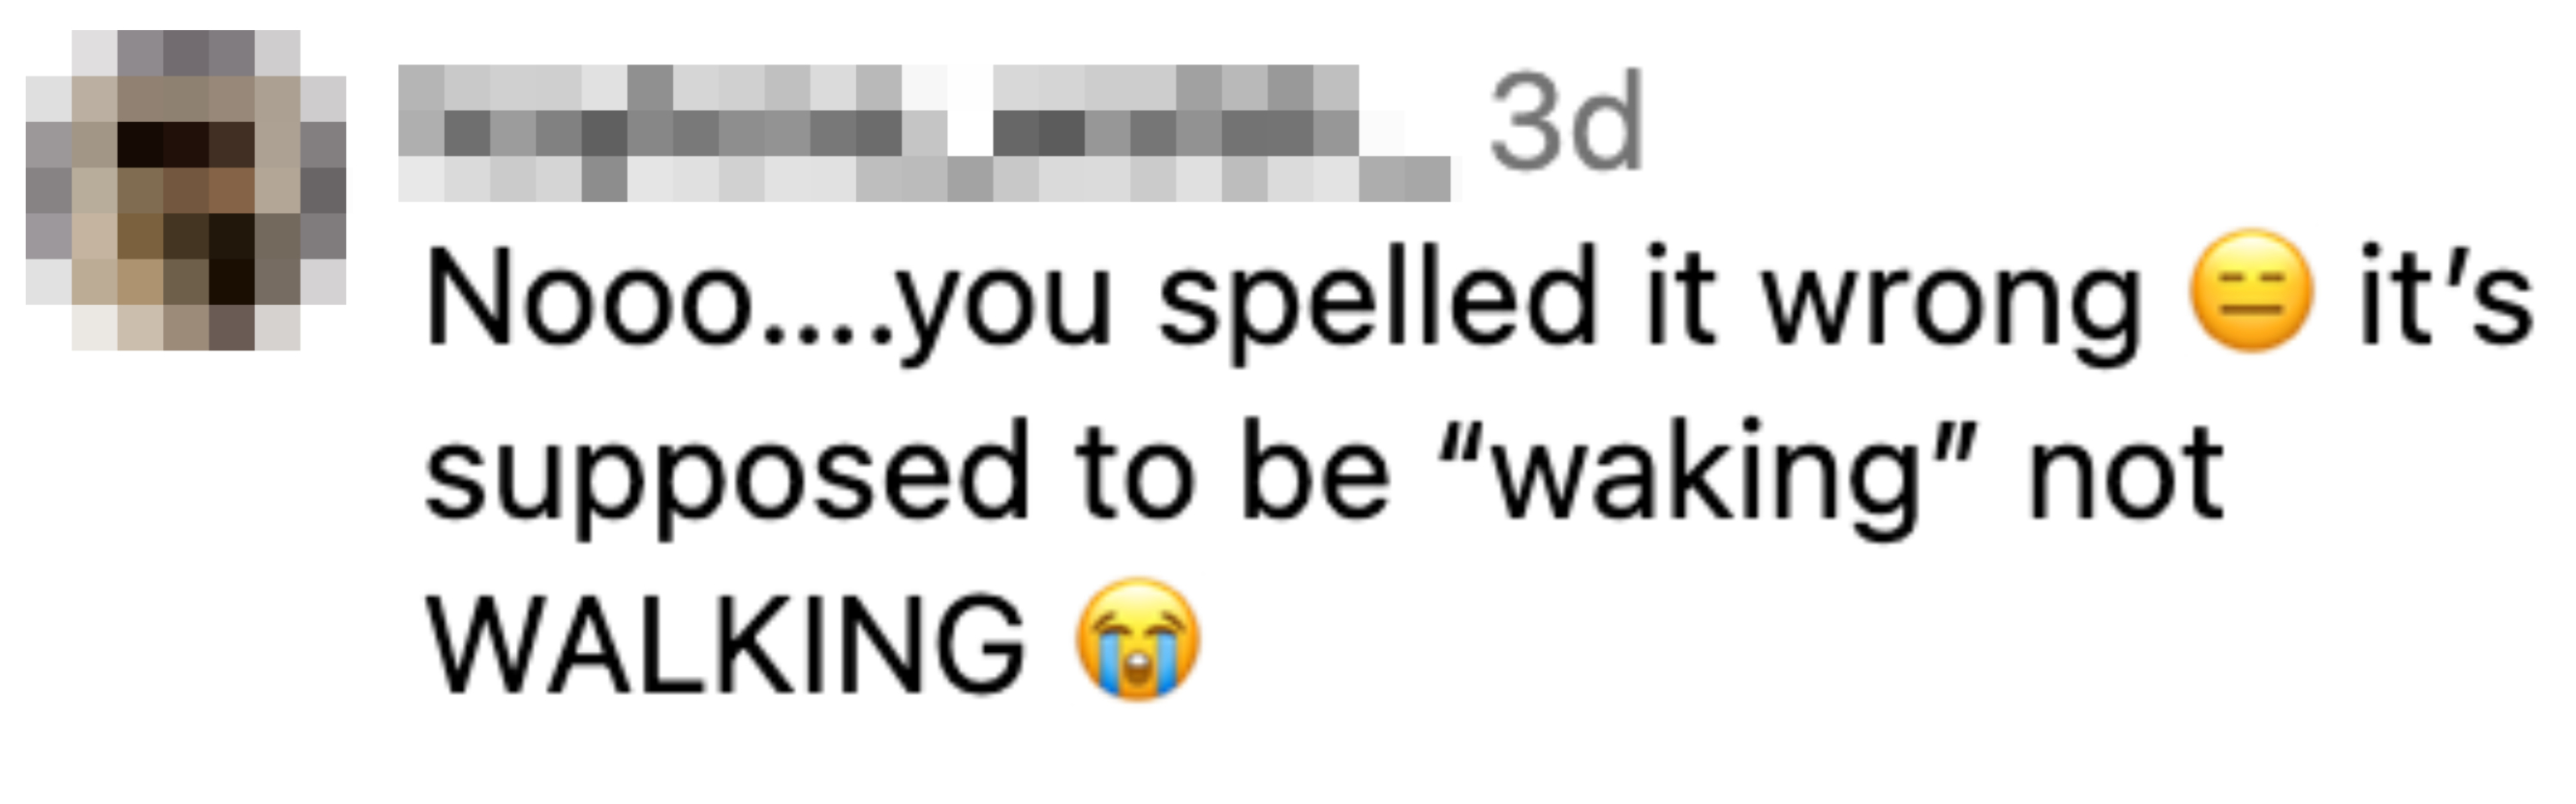 no you spelled it wrong it&#x27;s supposed to be waking not walking